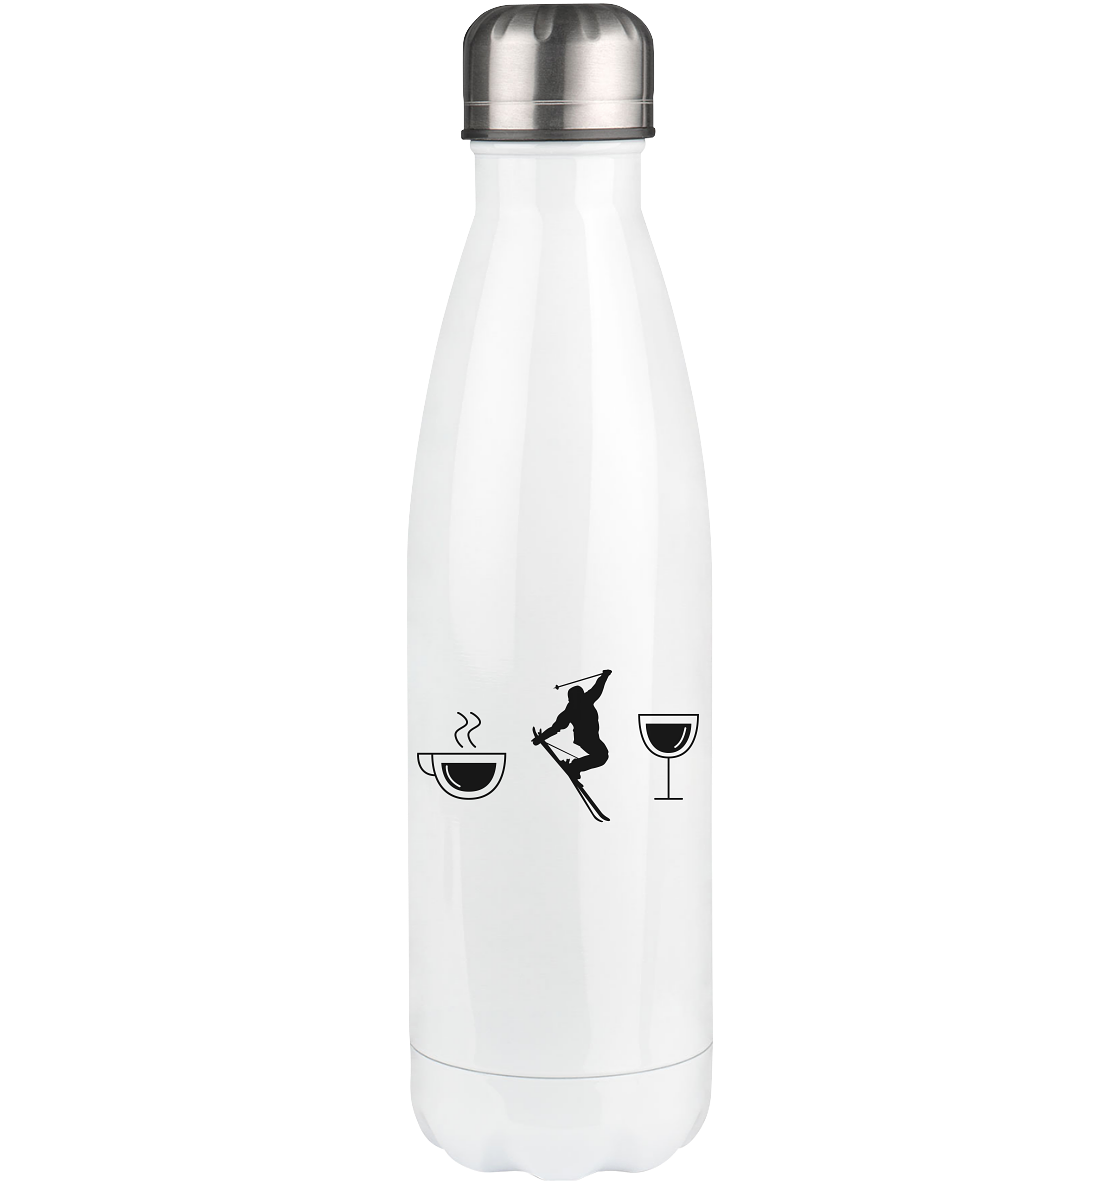 Coffee Wine and Skiing - Edelstahl Thermosflasche klettern ski 500ml